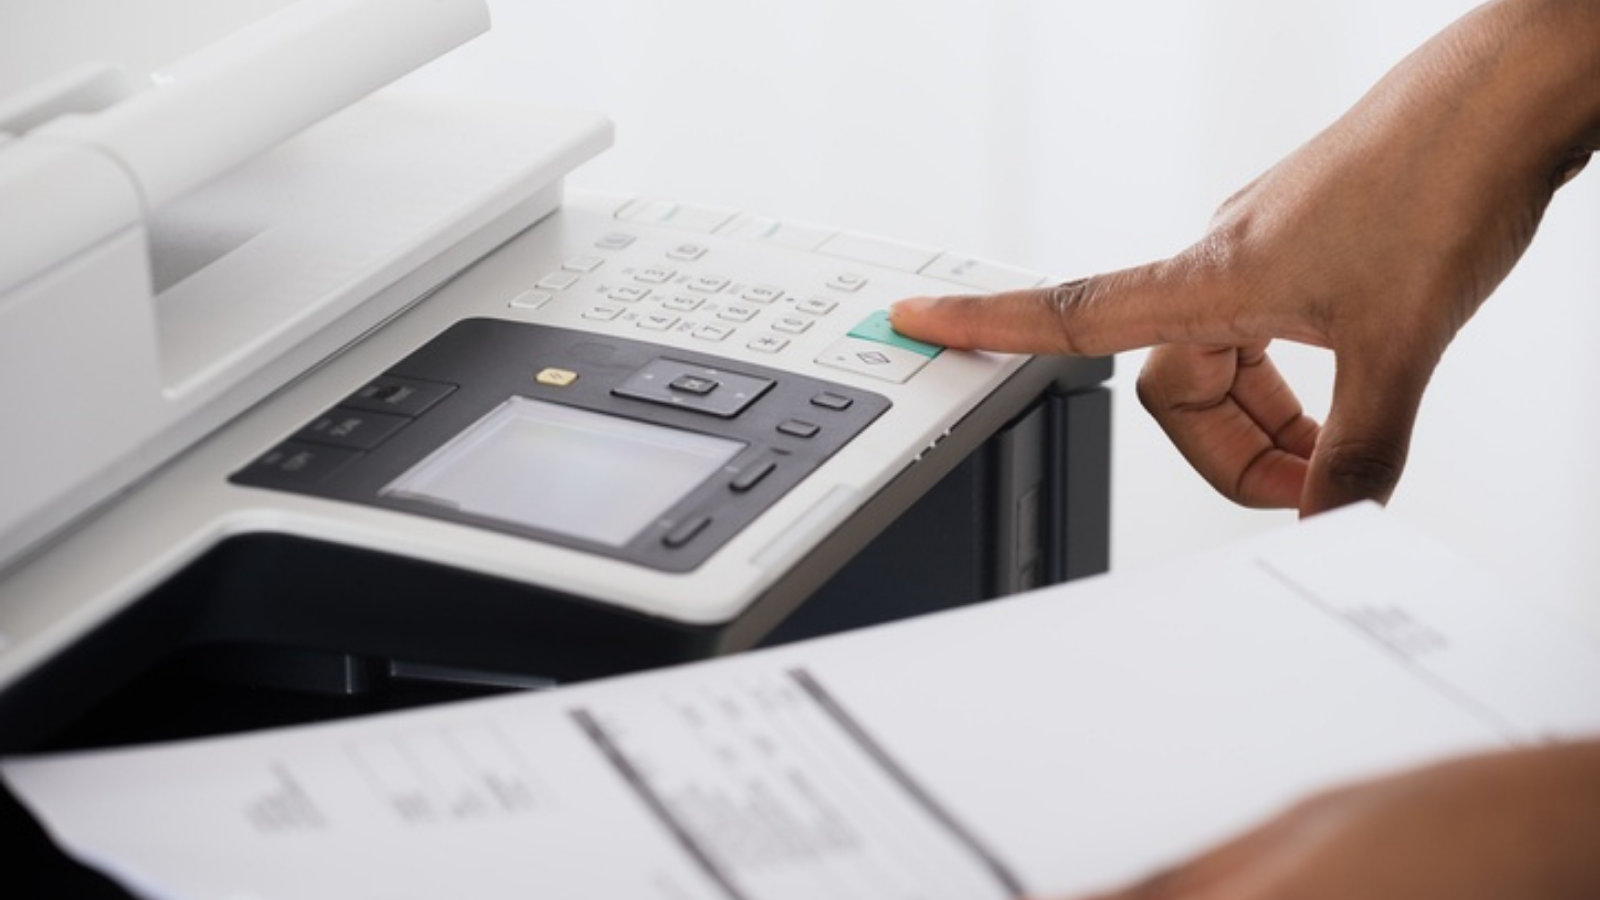 What Is Meant by Managed Print Services?